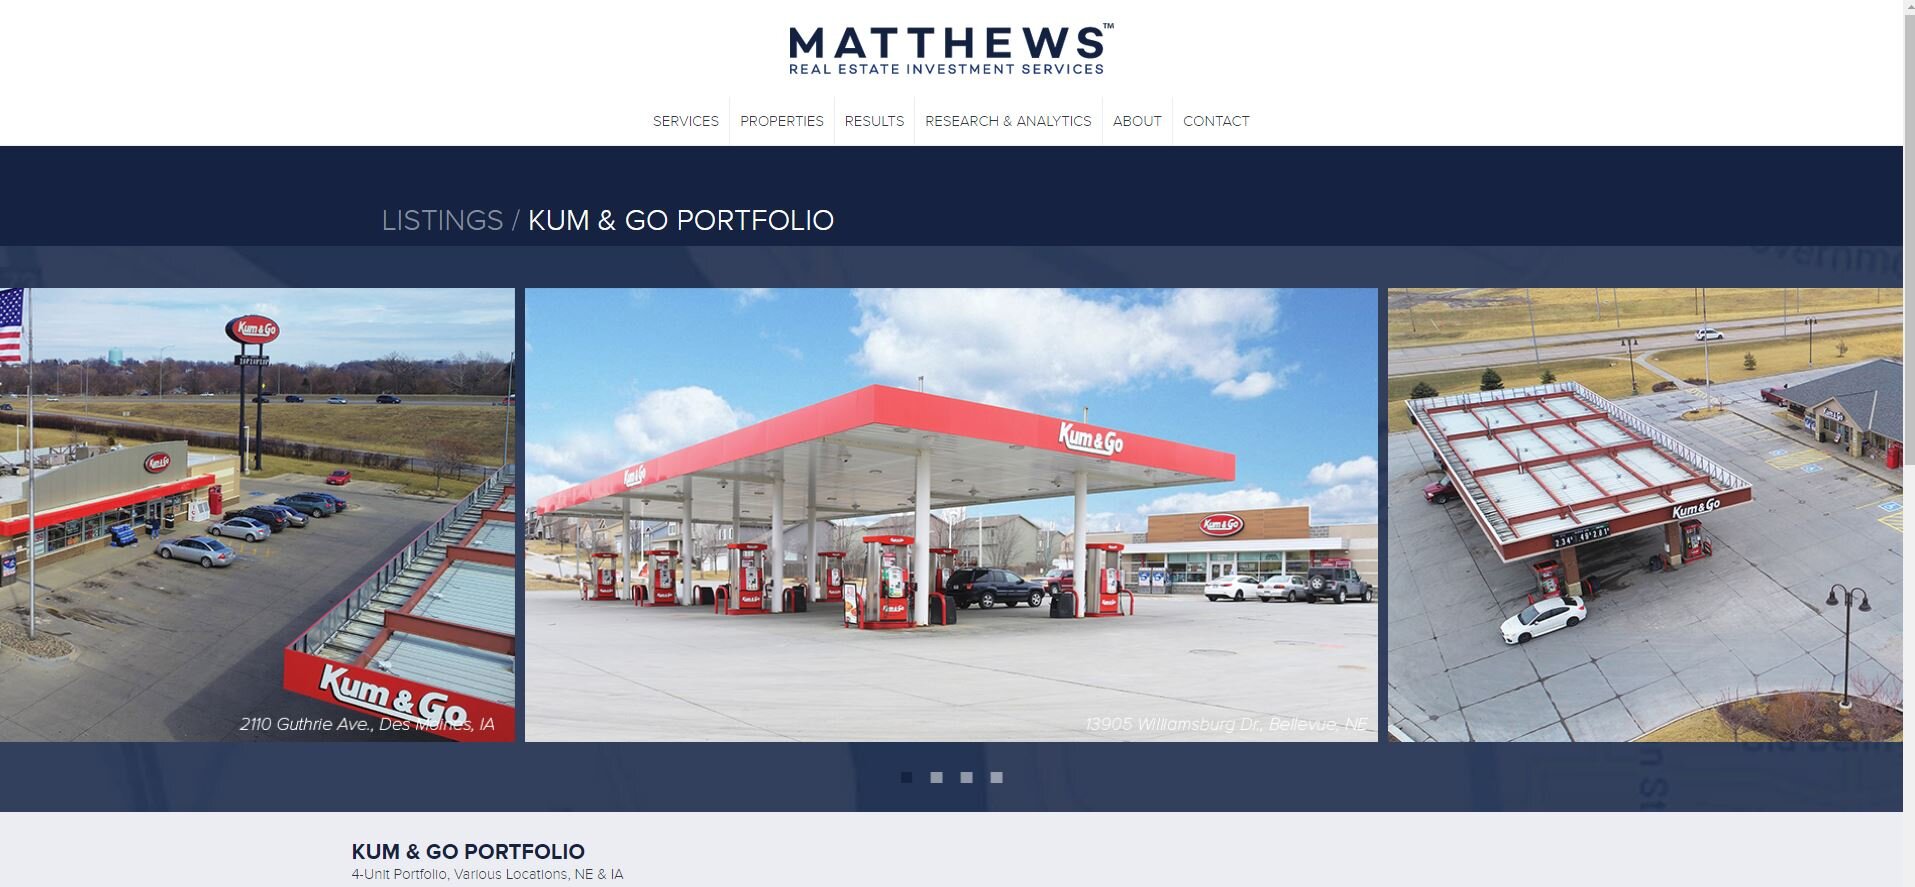 Matthews real estate investment services Kum and go.JPG